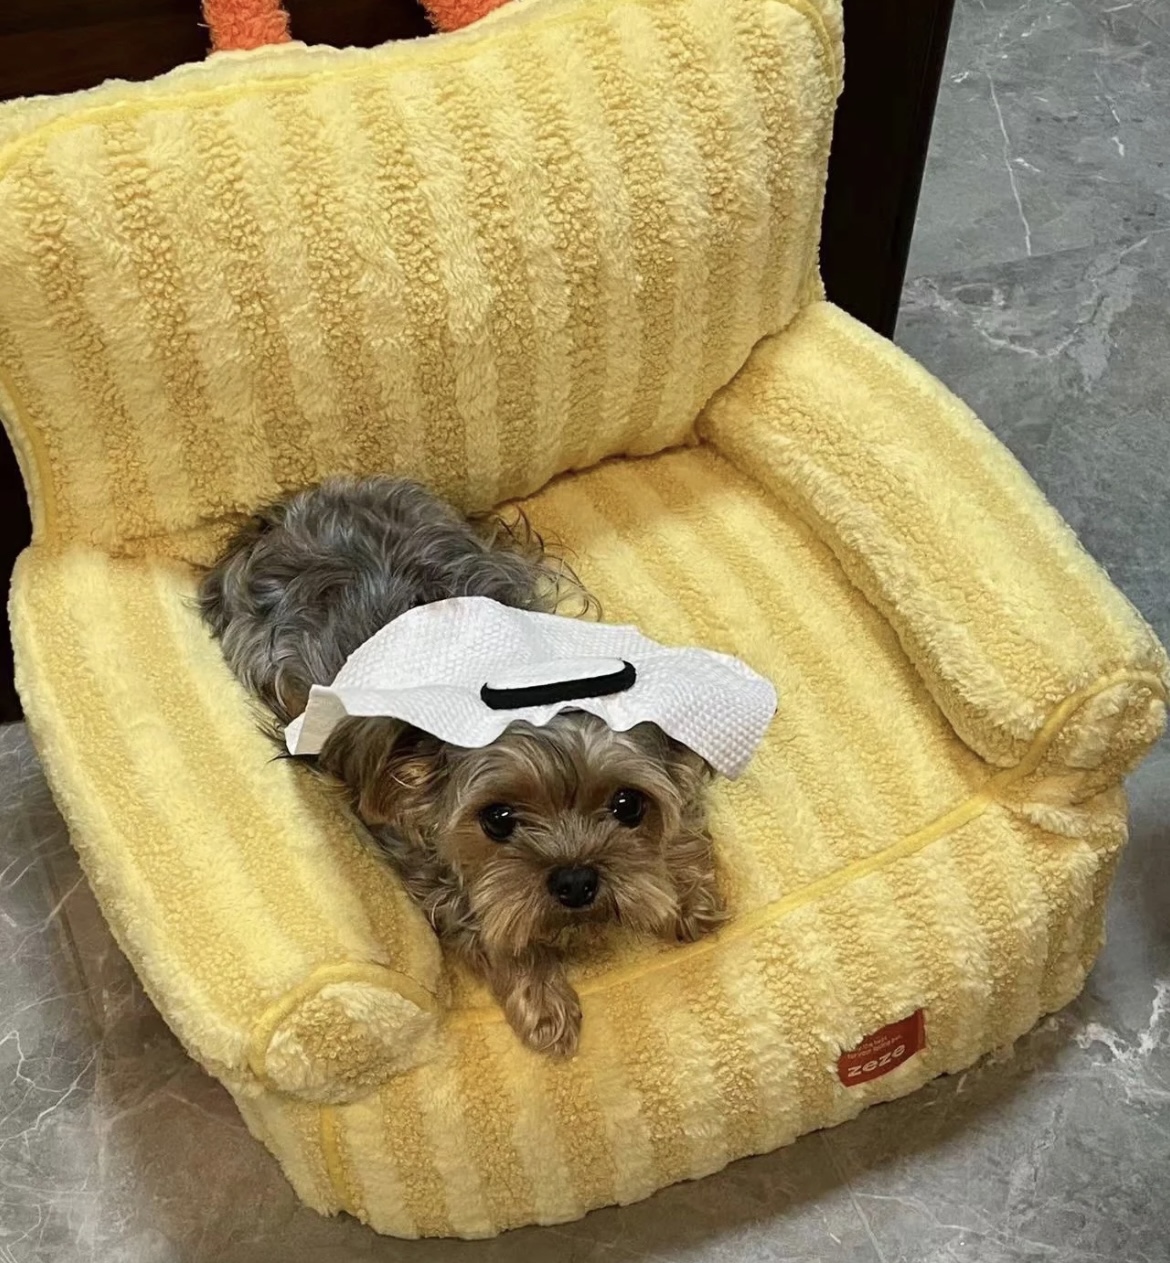 People In China Are Dressing Their Pets Up As La’eeb, The World Cup Mascot, And It’s The Cutest